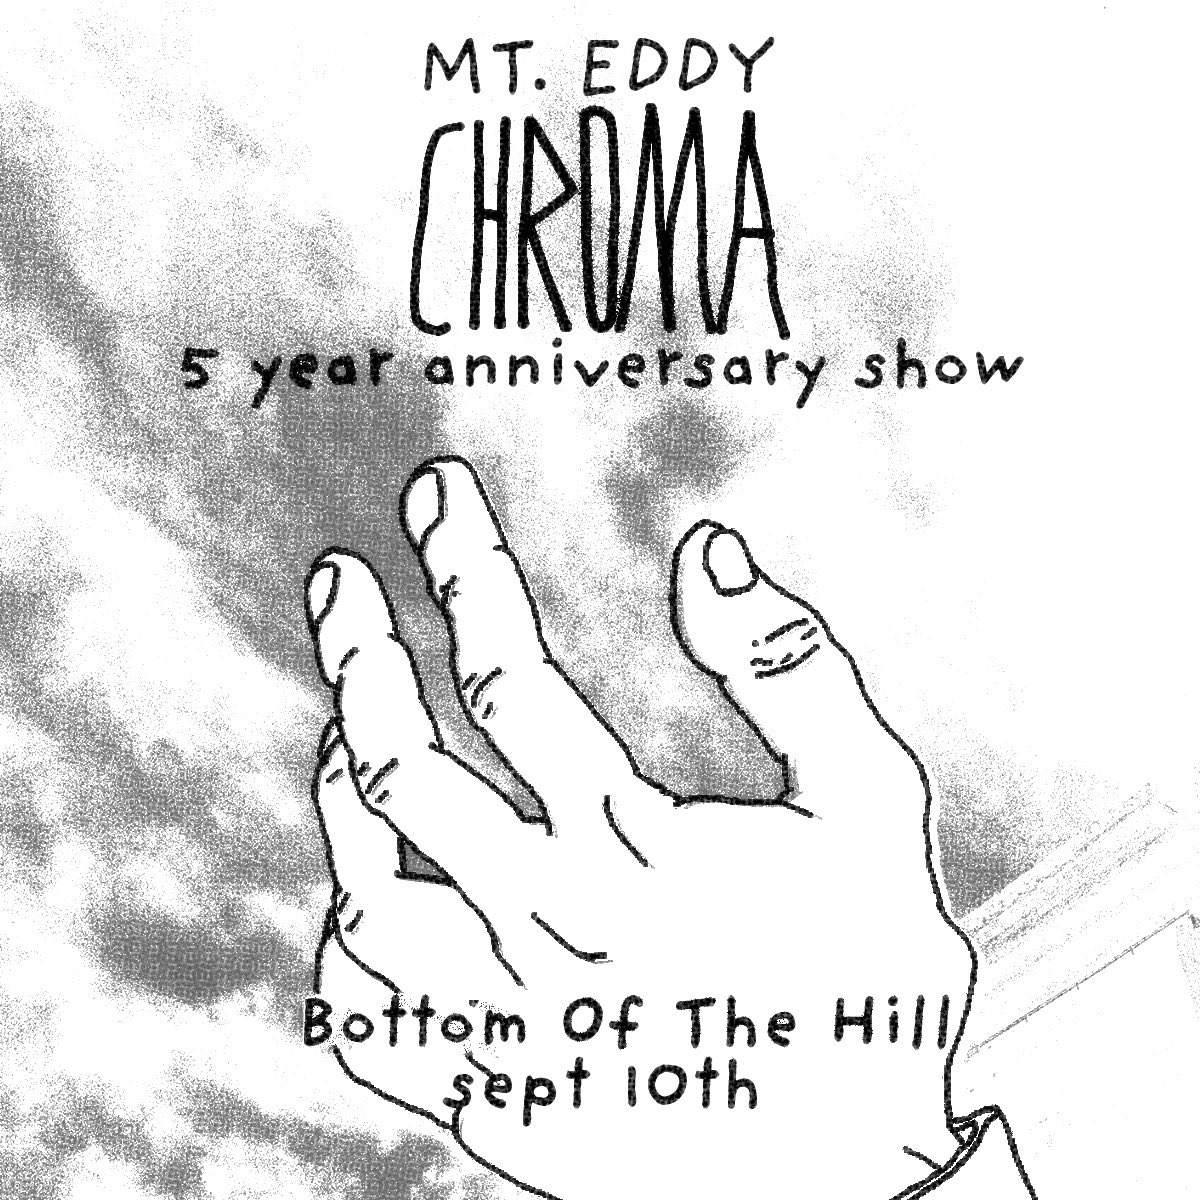 September 10, Mt. Eddy will be playing at Bottom Of The Hill in SF. We thought it was about time we celebrated over 5 years since chroma. So u can stop yelling “play lovely” at the UQ shows… Come see it live instead. Tickets on sale this Friday at 9am pst.